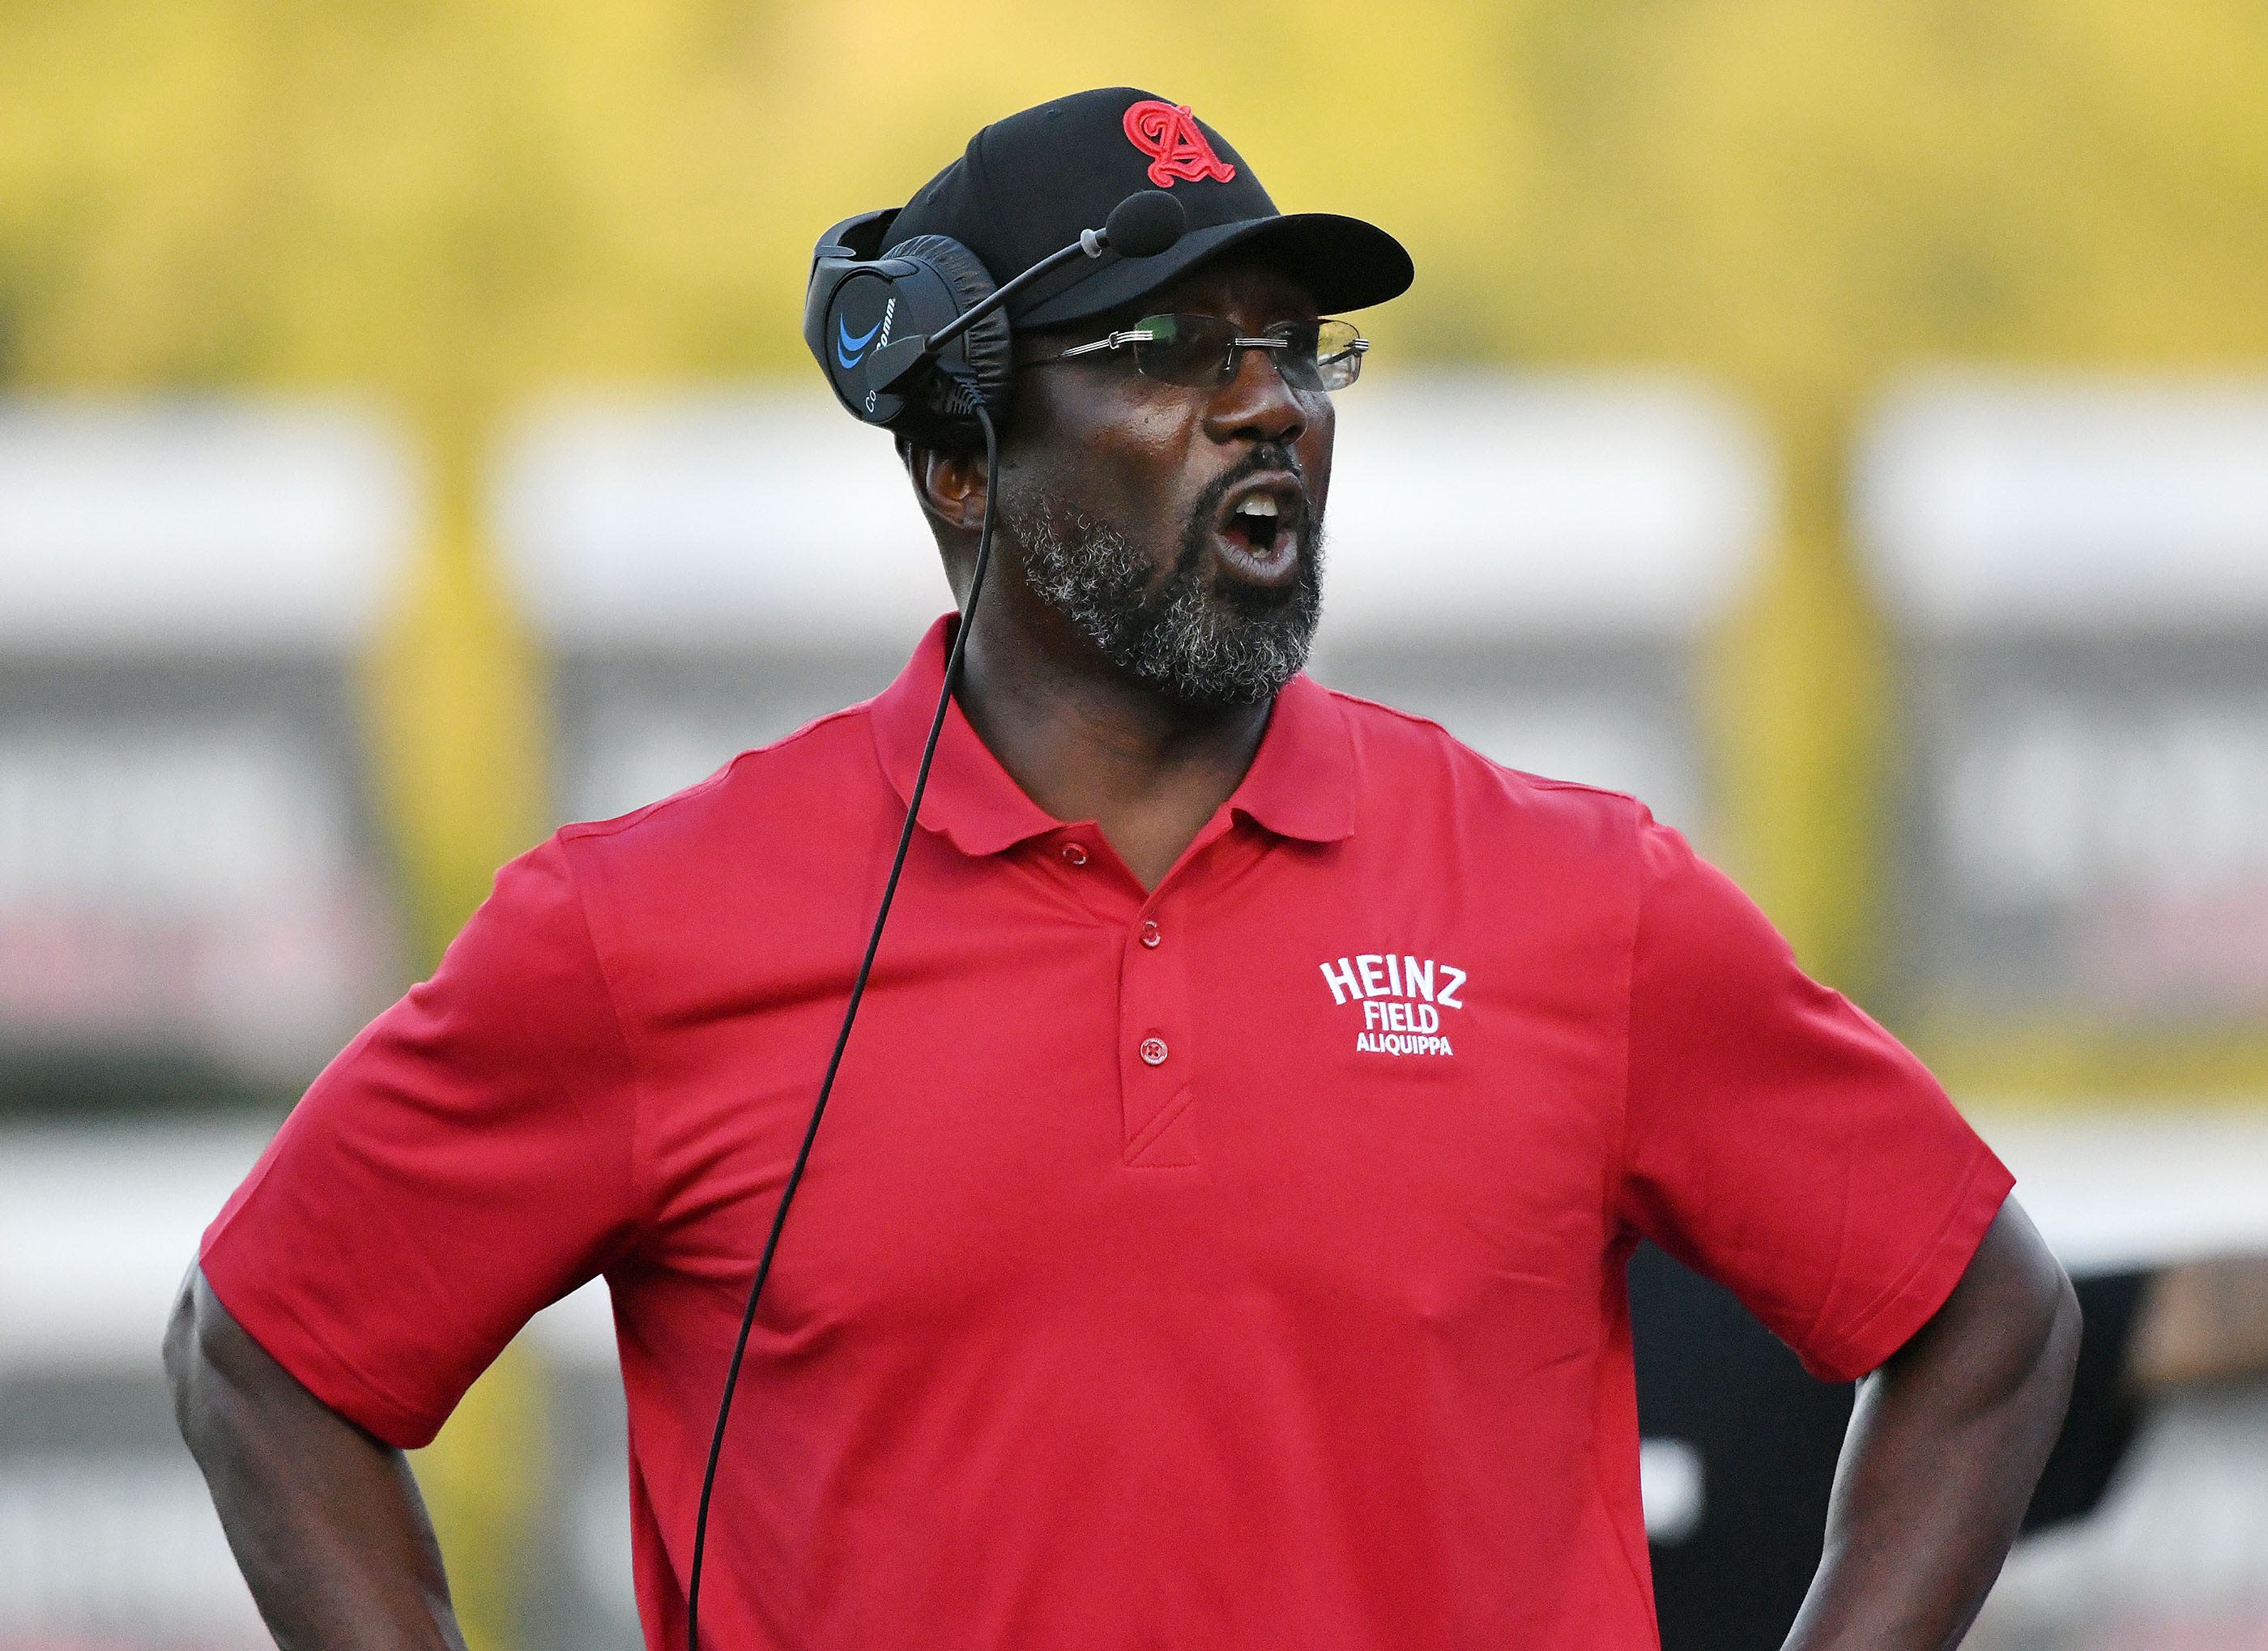 Aliquippa football head coach Mike Warfield to take leave of absence